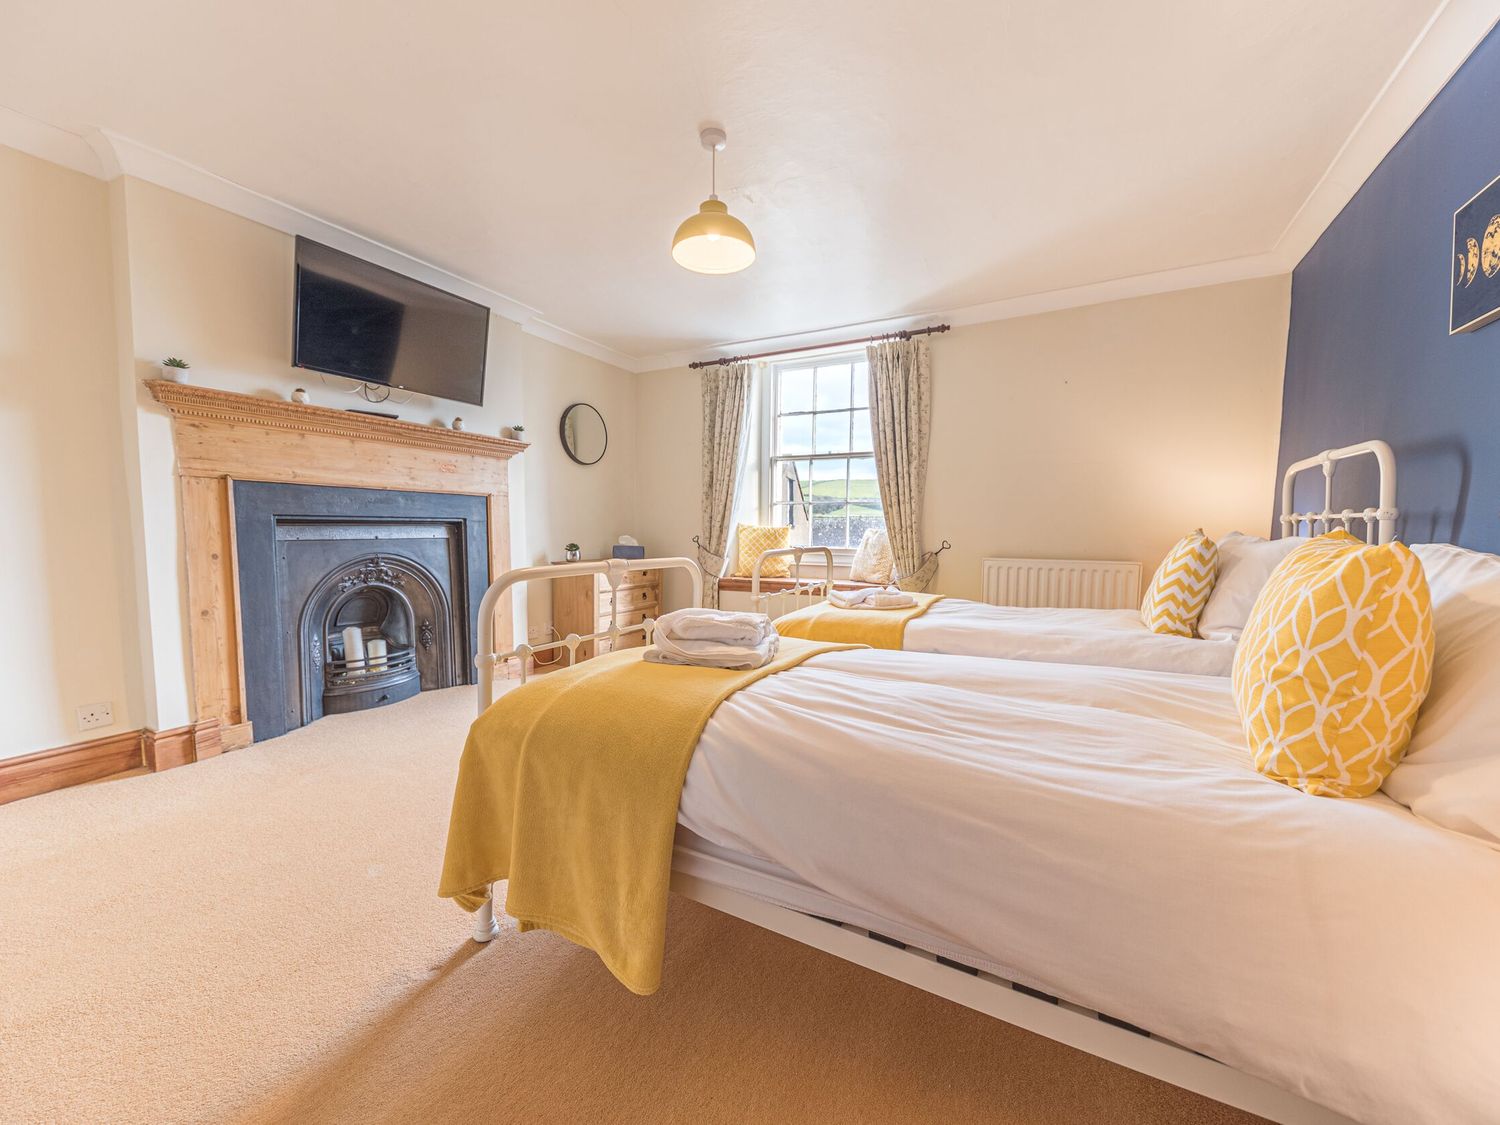 Abbey Farm House, St Bees, Cumbria. Large property sleeping 16. Pet-friendly. Off-road parking. AGA.